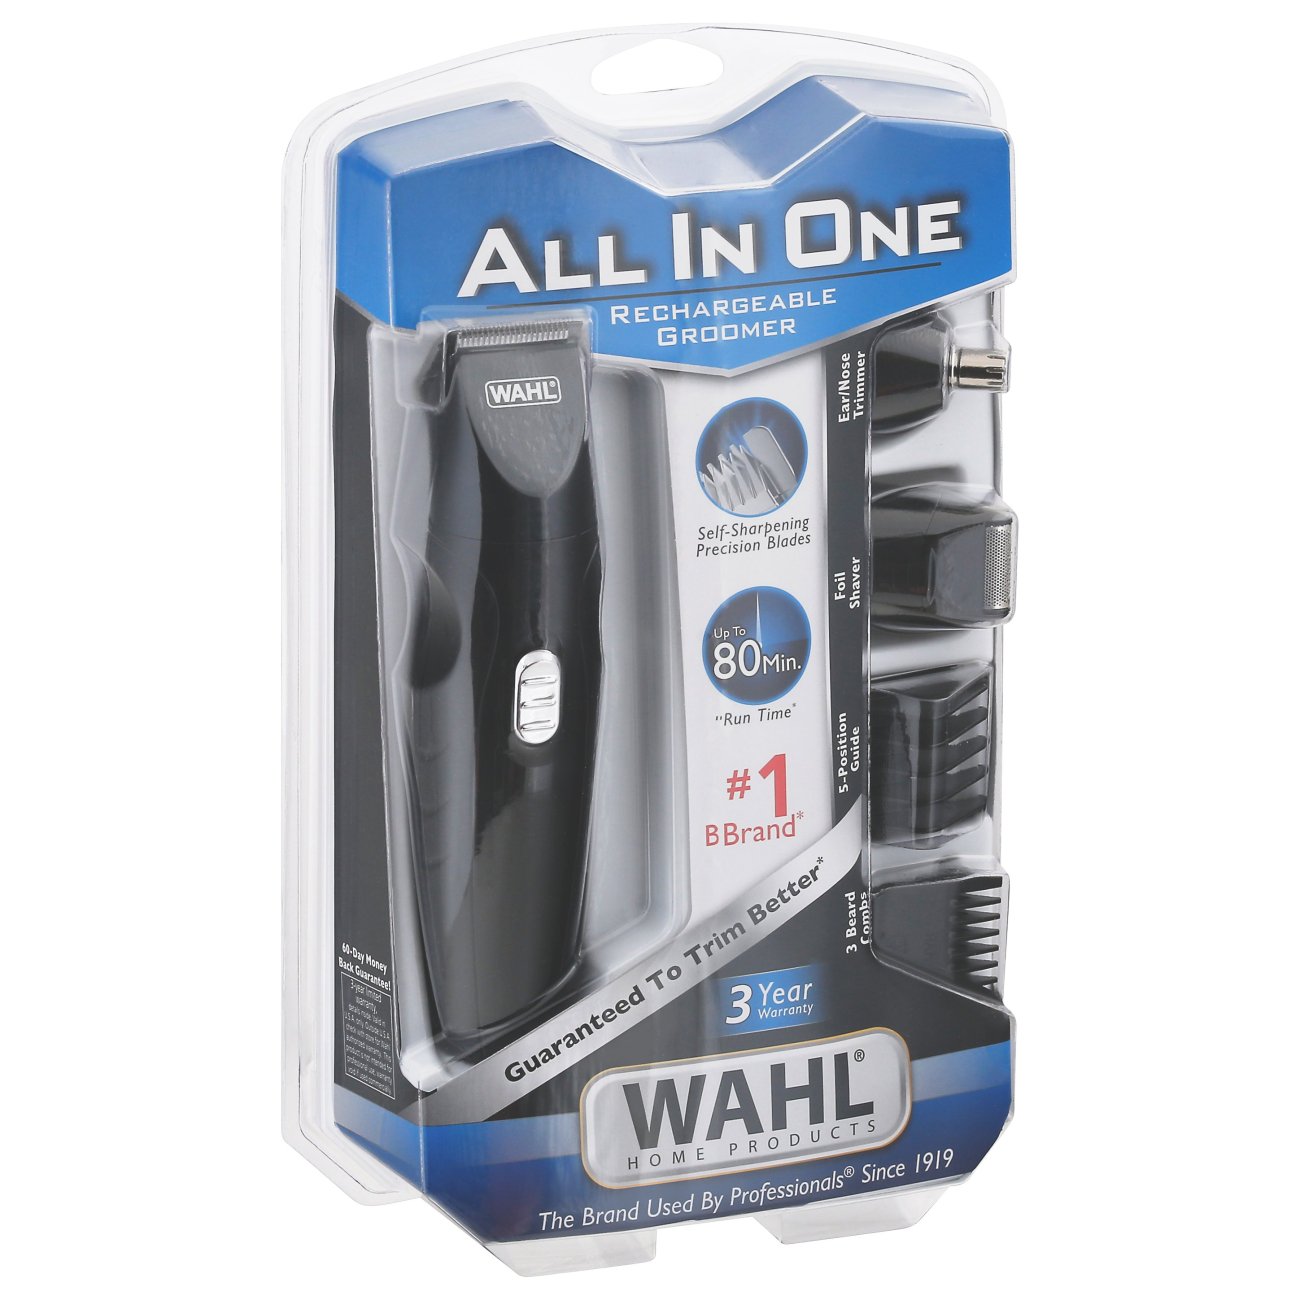 Wahl All In One Rechargeable Groomer Kit - Shop Electric Shavers  Trimmers  at H-E-B